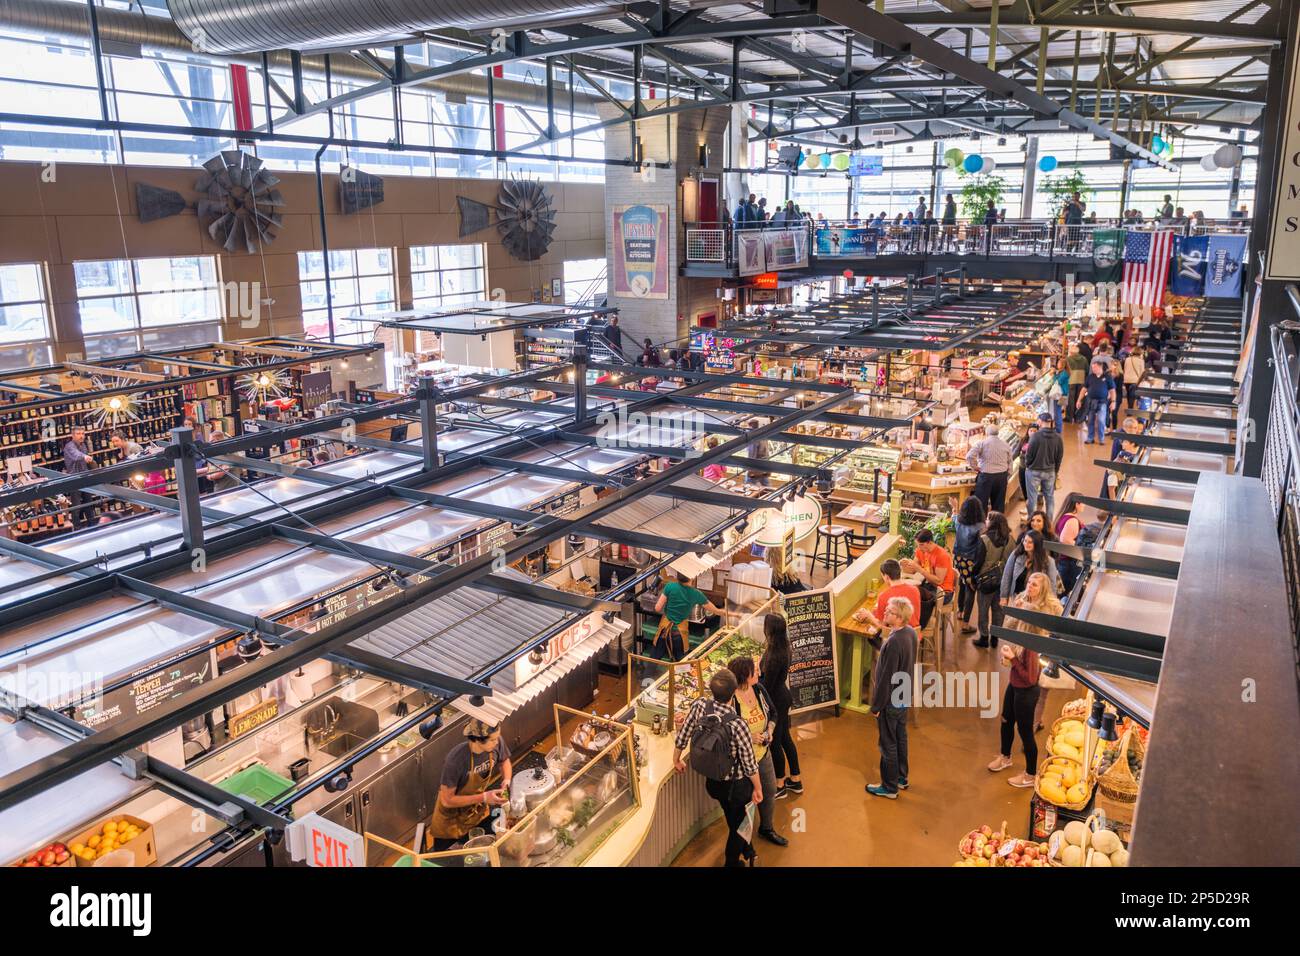 MILWAUKEE, WISCONSIN - MAY 19, 2018: Shoppers in the interior of Milwaukee Public Market. The market opened in 2005. Stock Photo